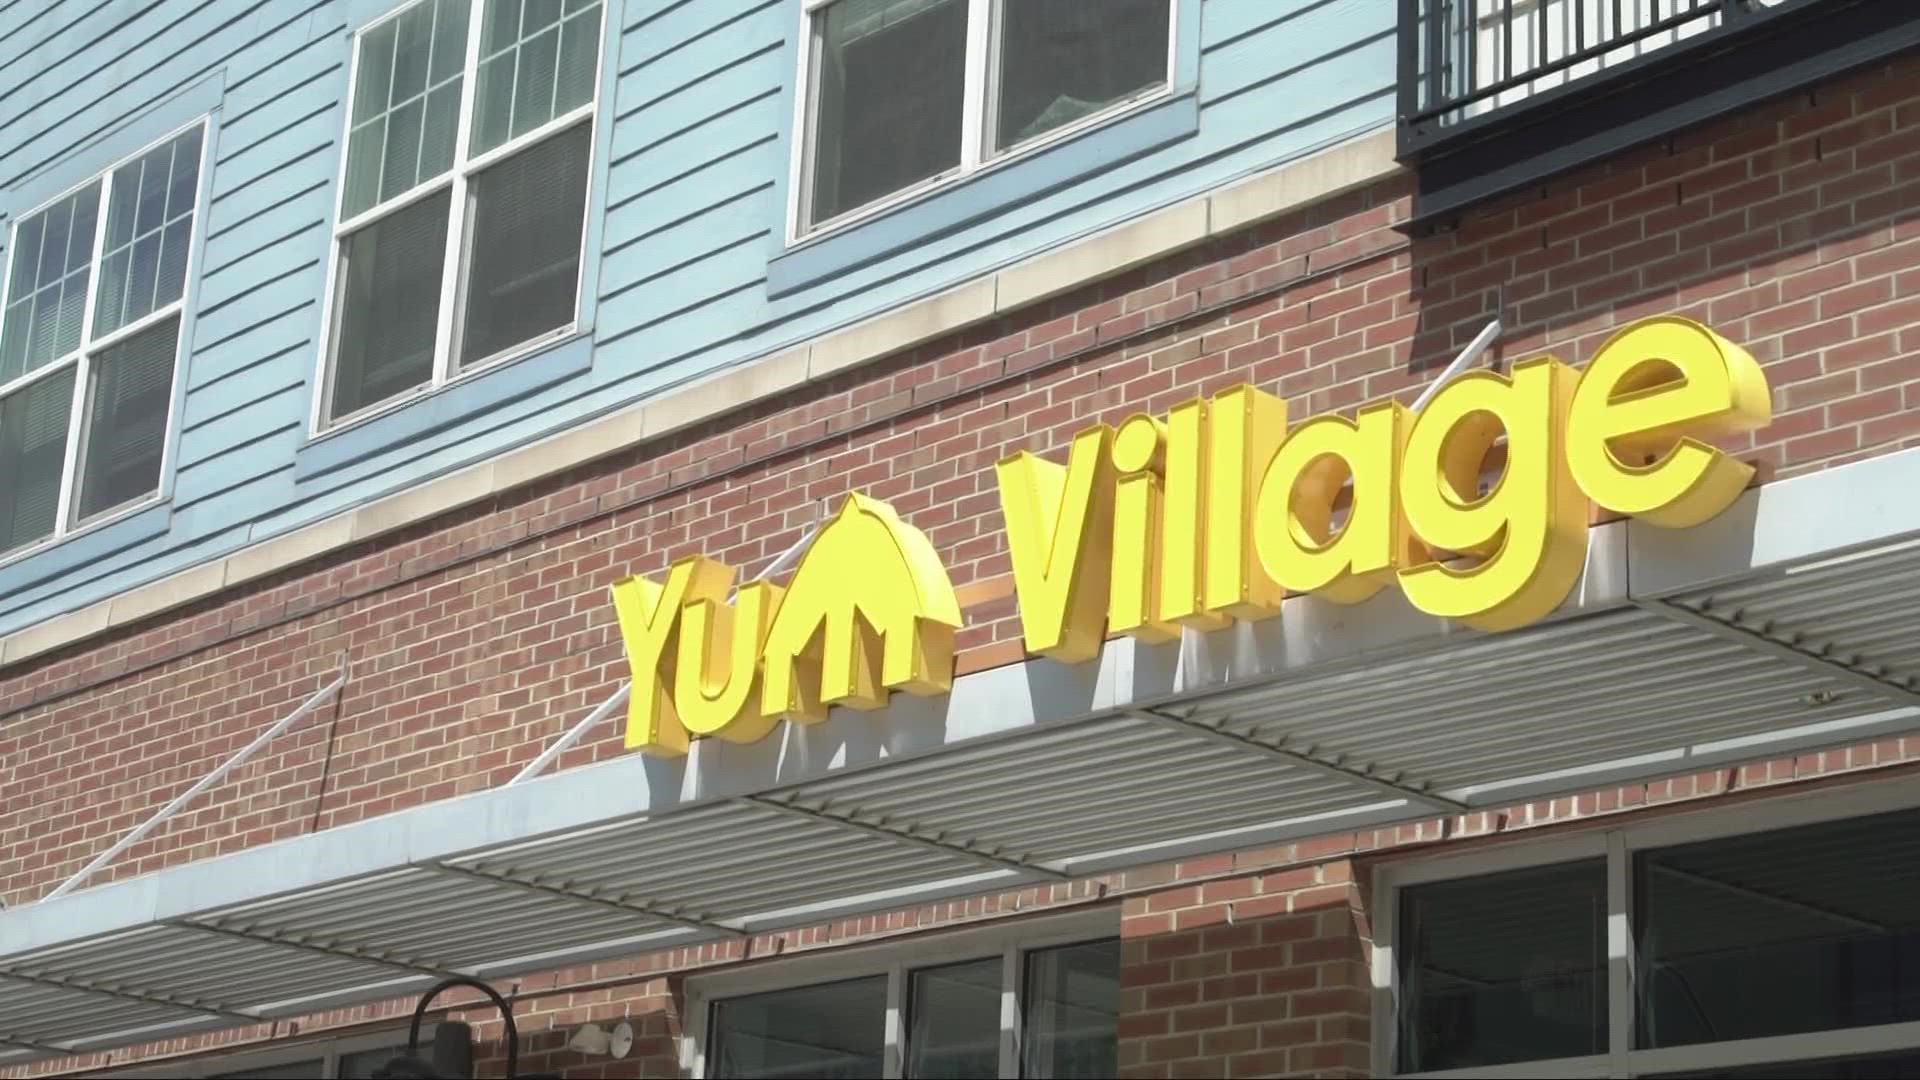 3News' Isabel Lawrence visited YumVillage in Cleveland.